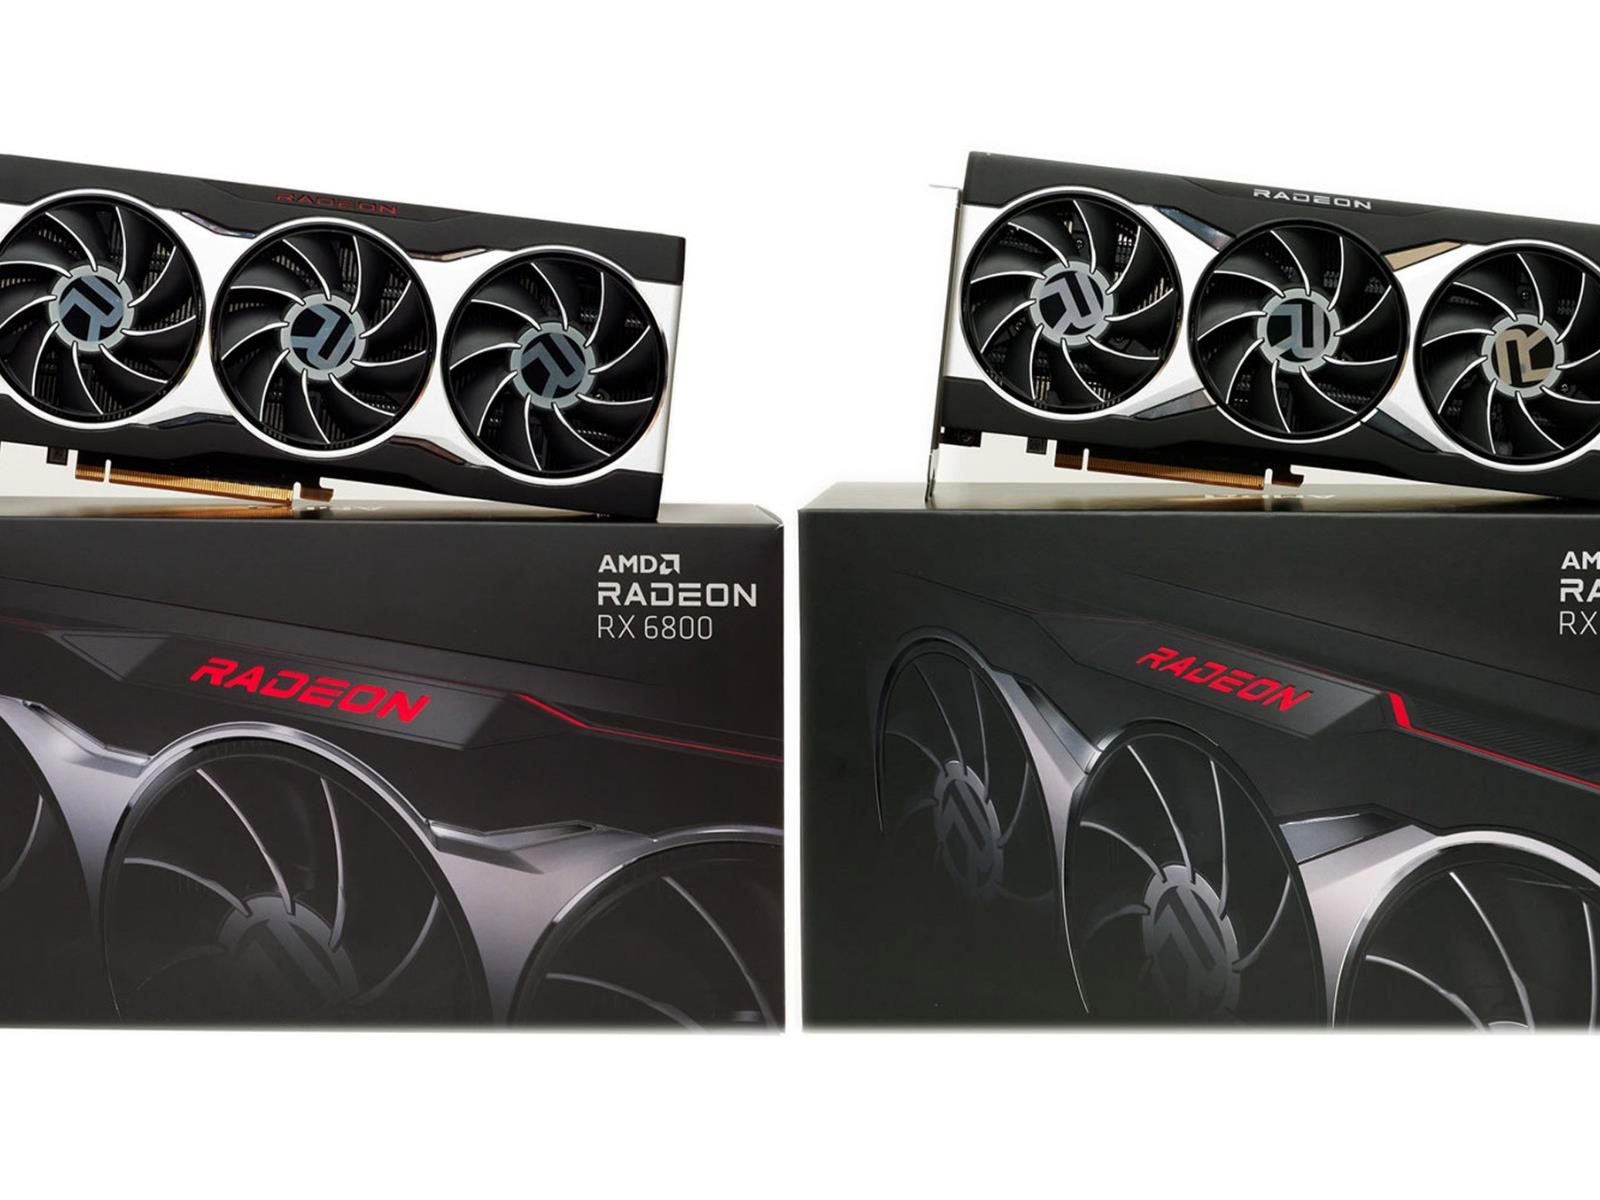 Radeon RX 6800 & RX 6800 XT Review: AMD's Back With Big Navi